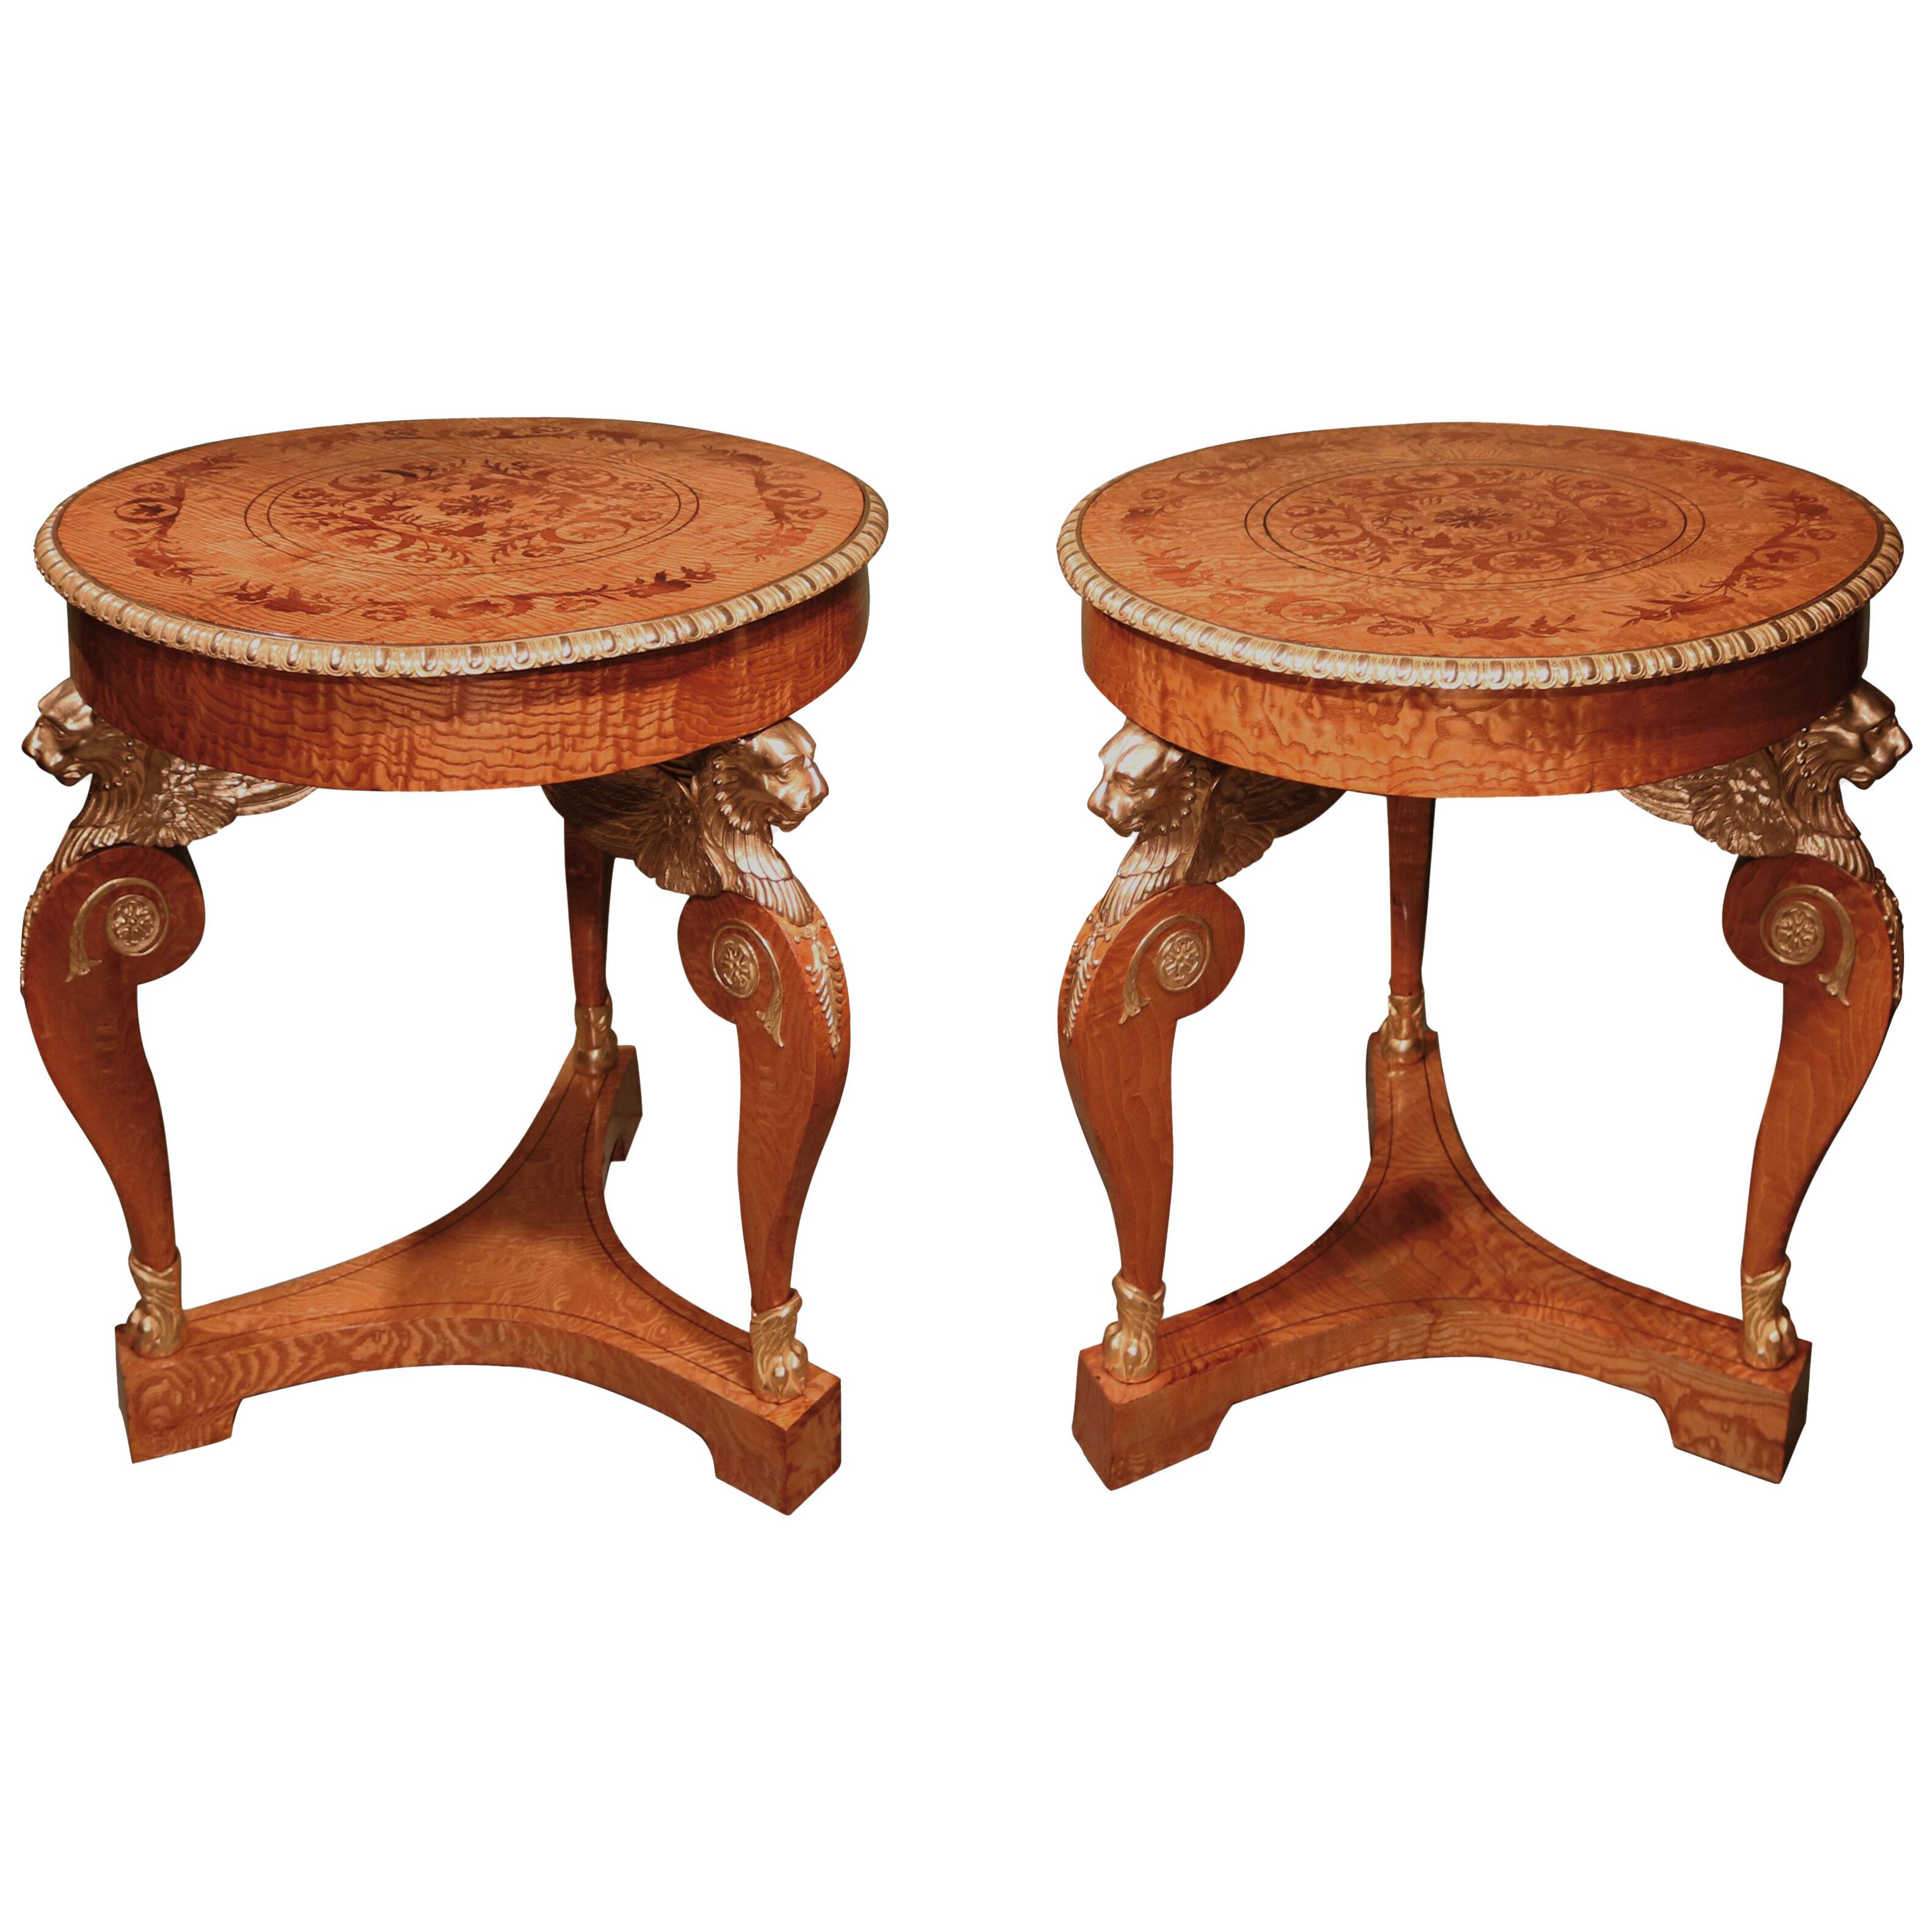 Pair Of Mid 19th Century Russian Ormolu Mounted Hungarian Ashwood Centre Tables